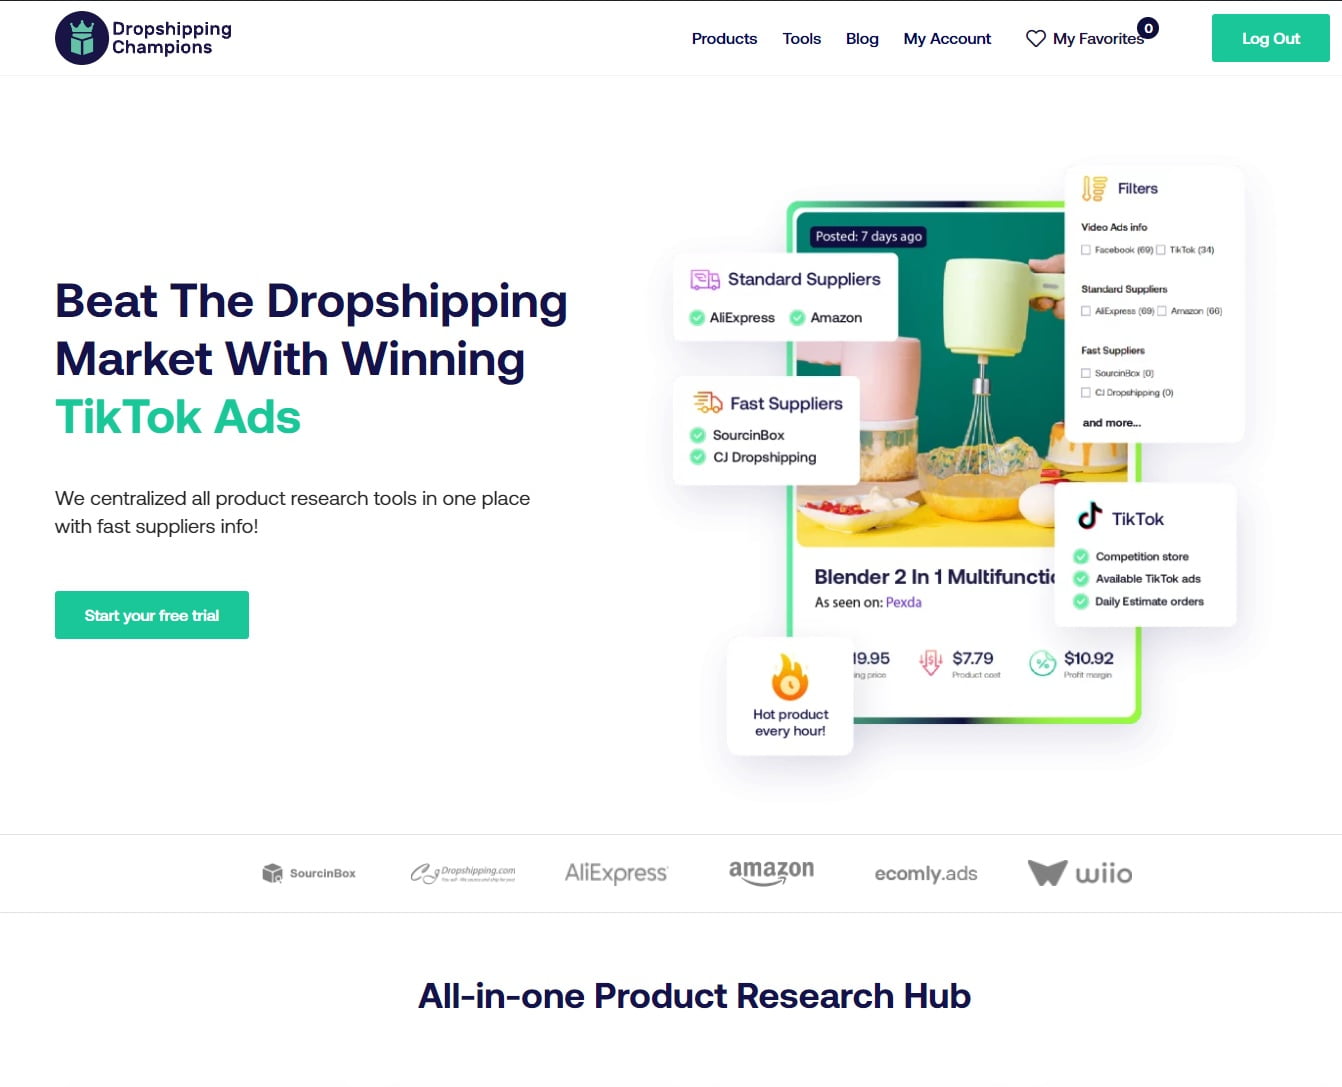 The best product finder for Shopify, Woocommerce or ecommerce platforms. Dropshipping Champions.